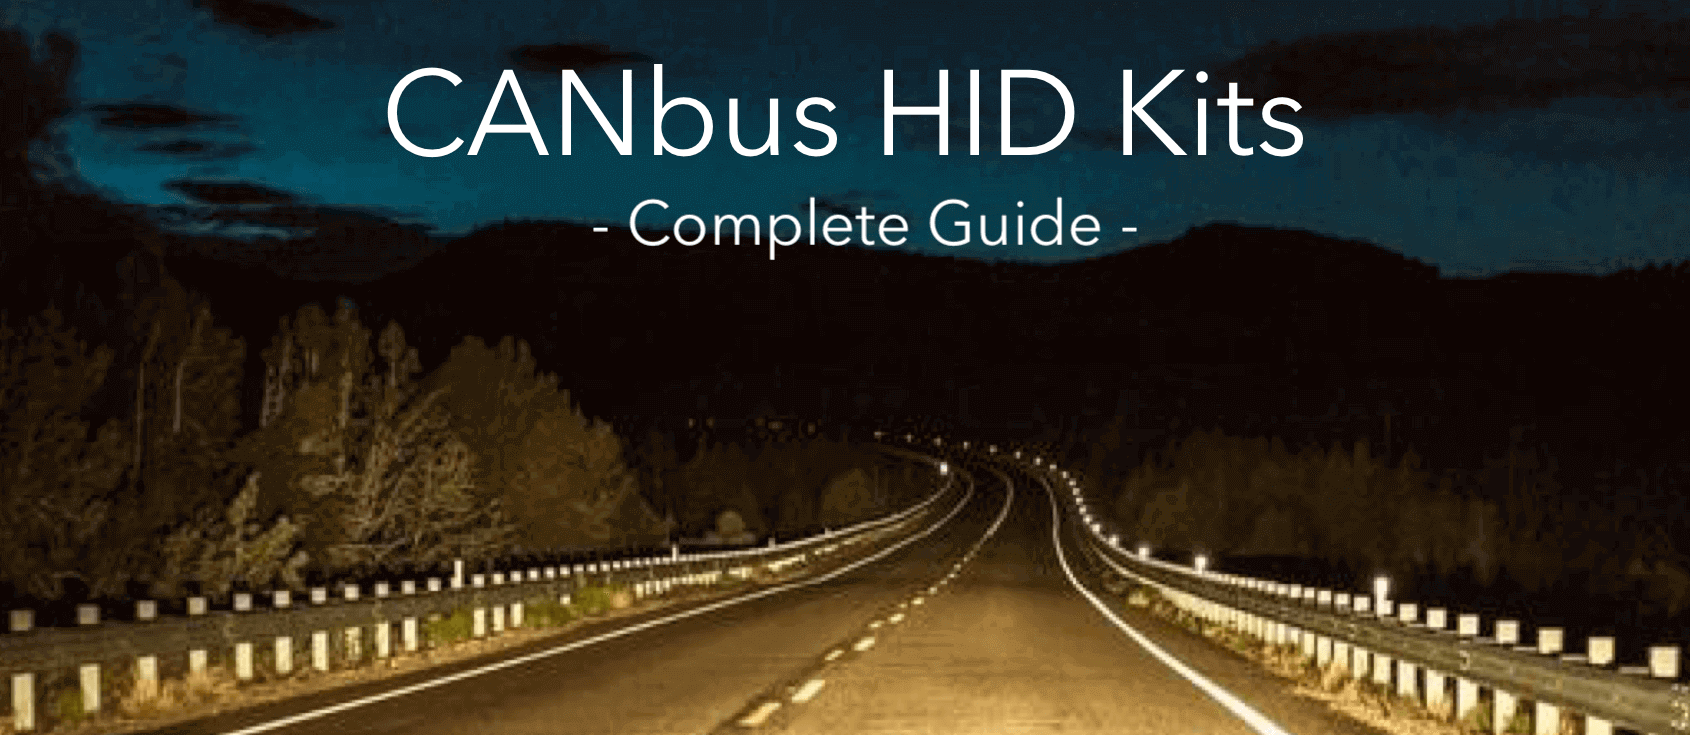 XenonPro - A Complete Guide to CANbus HID Kits